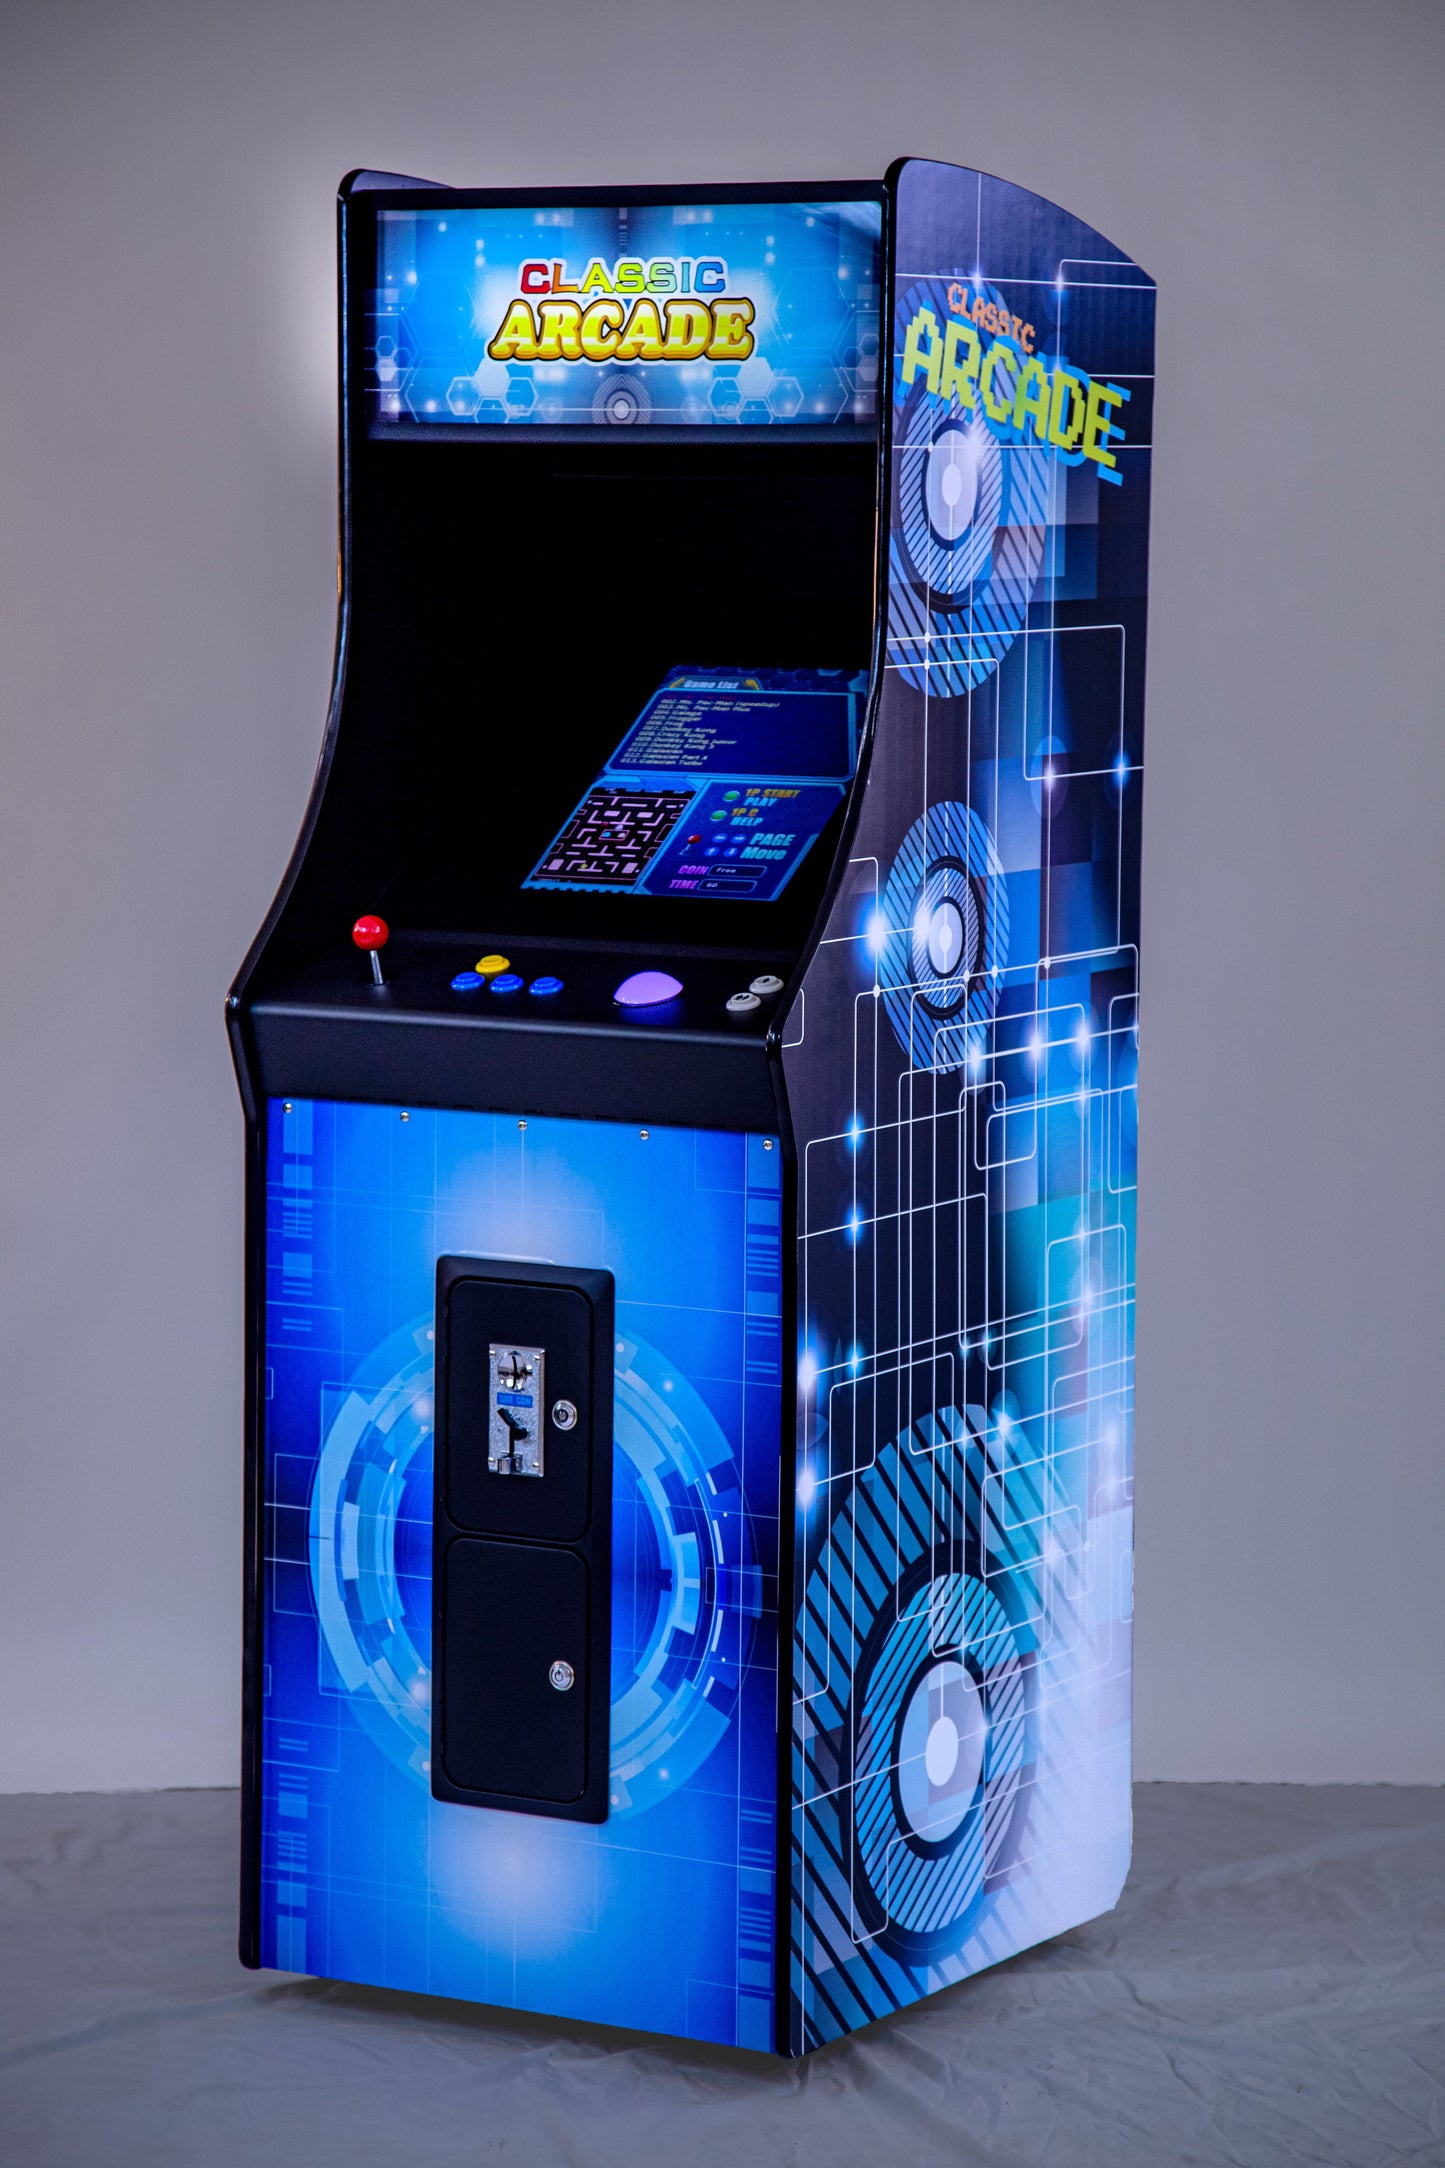 Full-Sized Upright Arcade Game with 456 Classic, Golden Age Games, and Trackball